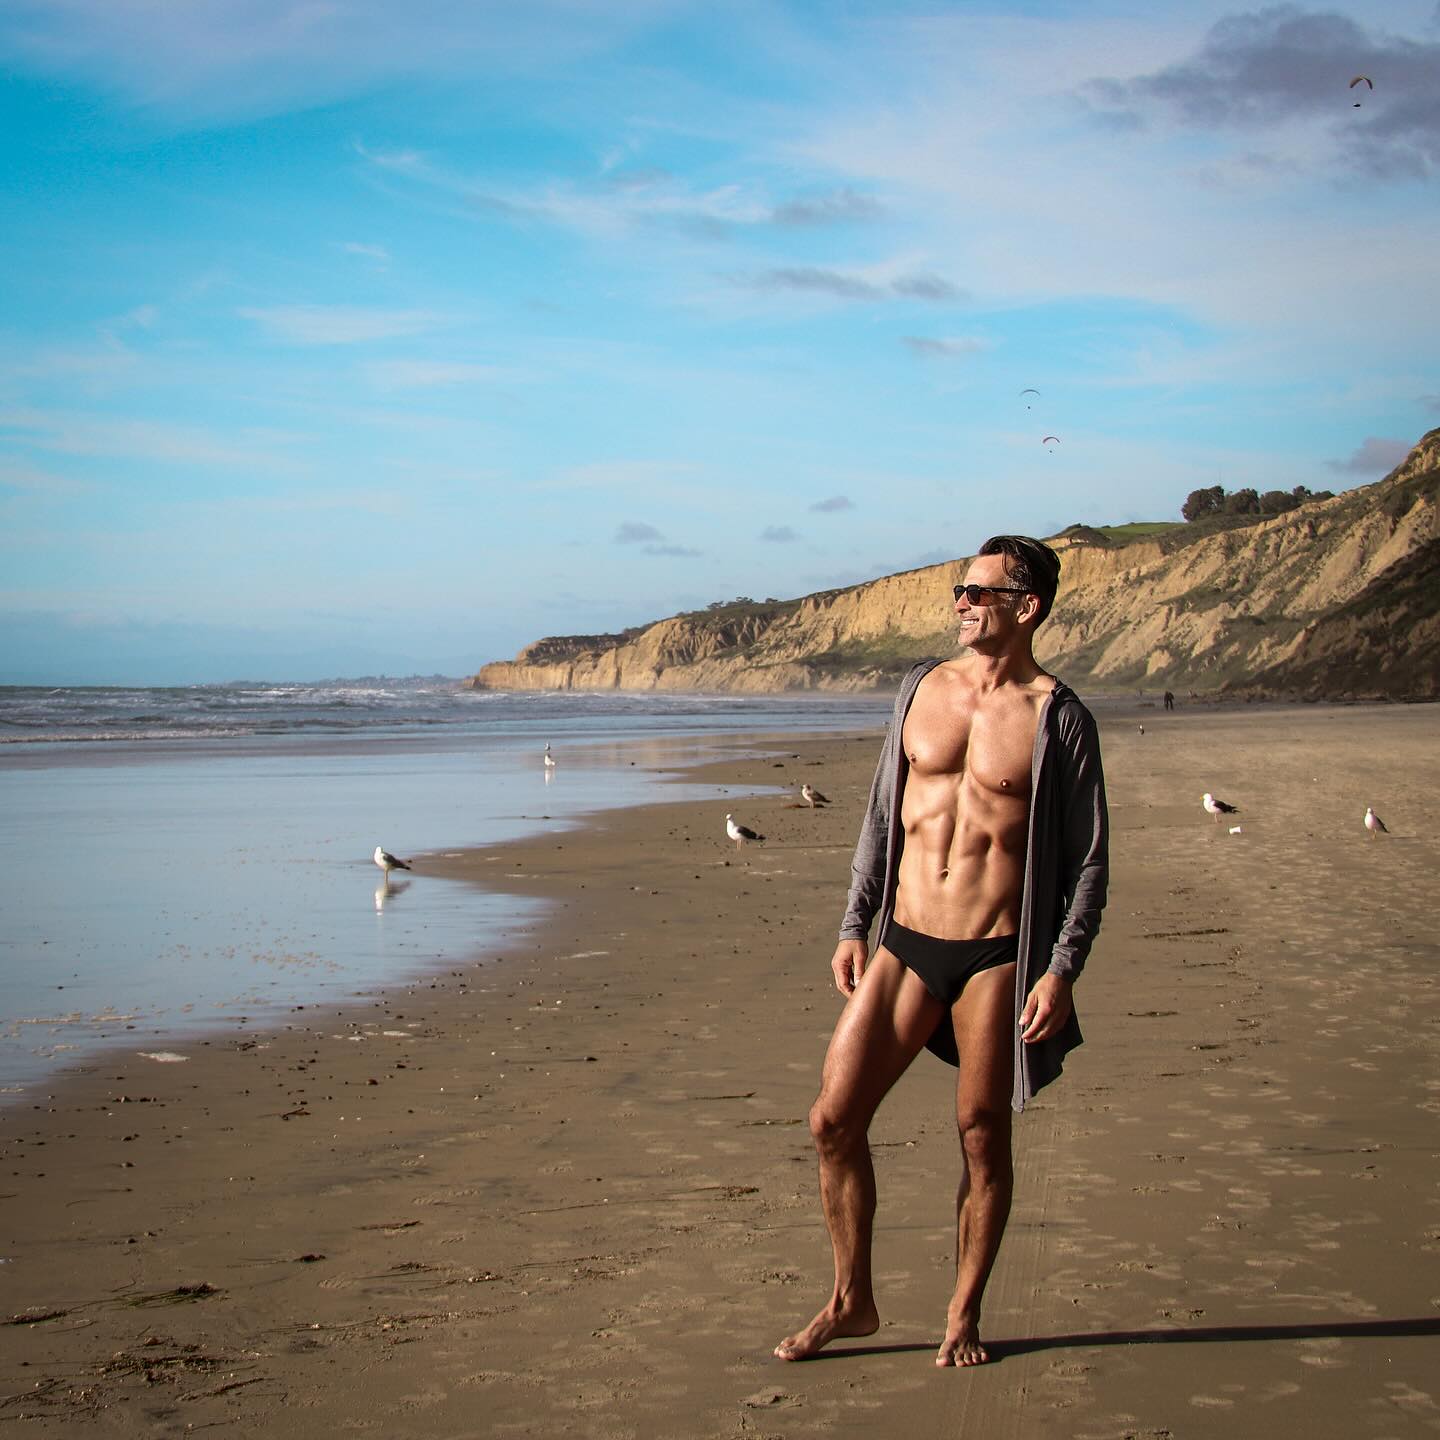 My natural habitat, beach 🏖️ Looking at you Summer and seeing those days come closer and closer… 😎 in the meantime a couple midweek days on the beach never hurt anyone! Good times, beachside, always↣ 
⇟
⇟
⇟
Surf and swim pancho available on @amazon storefront: 
runwithryan.org/amazon ↞ #linkinbio 😉 or on my @shop.ltk ↣ https://liketk.it/4zCSe 
⇟
⇟ 
⇟
⇟
#luxuryofadventure #runwithryan #ryyoung #ryanyoung #amazonfinds #founditonamazon #malemodel #coofandy #mensstyle #beachlife #beachvibes #beach #mensbody #mensswim #mensswimwear #abs #body #beachstyle #beachstyles #surfstyle #surf #travelblogger #amazoninfluencer #malebody #swimwear #springbreak #summerstyle #menofinstagram #adventuretravel